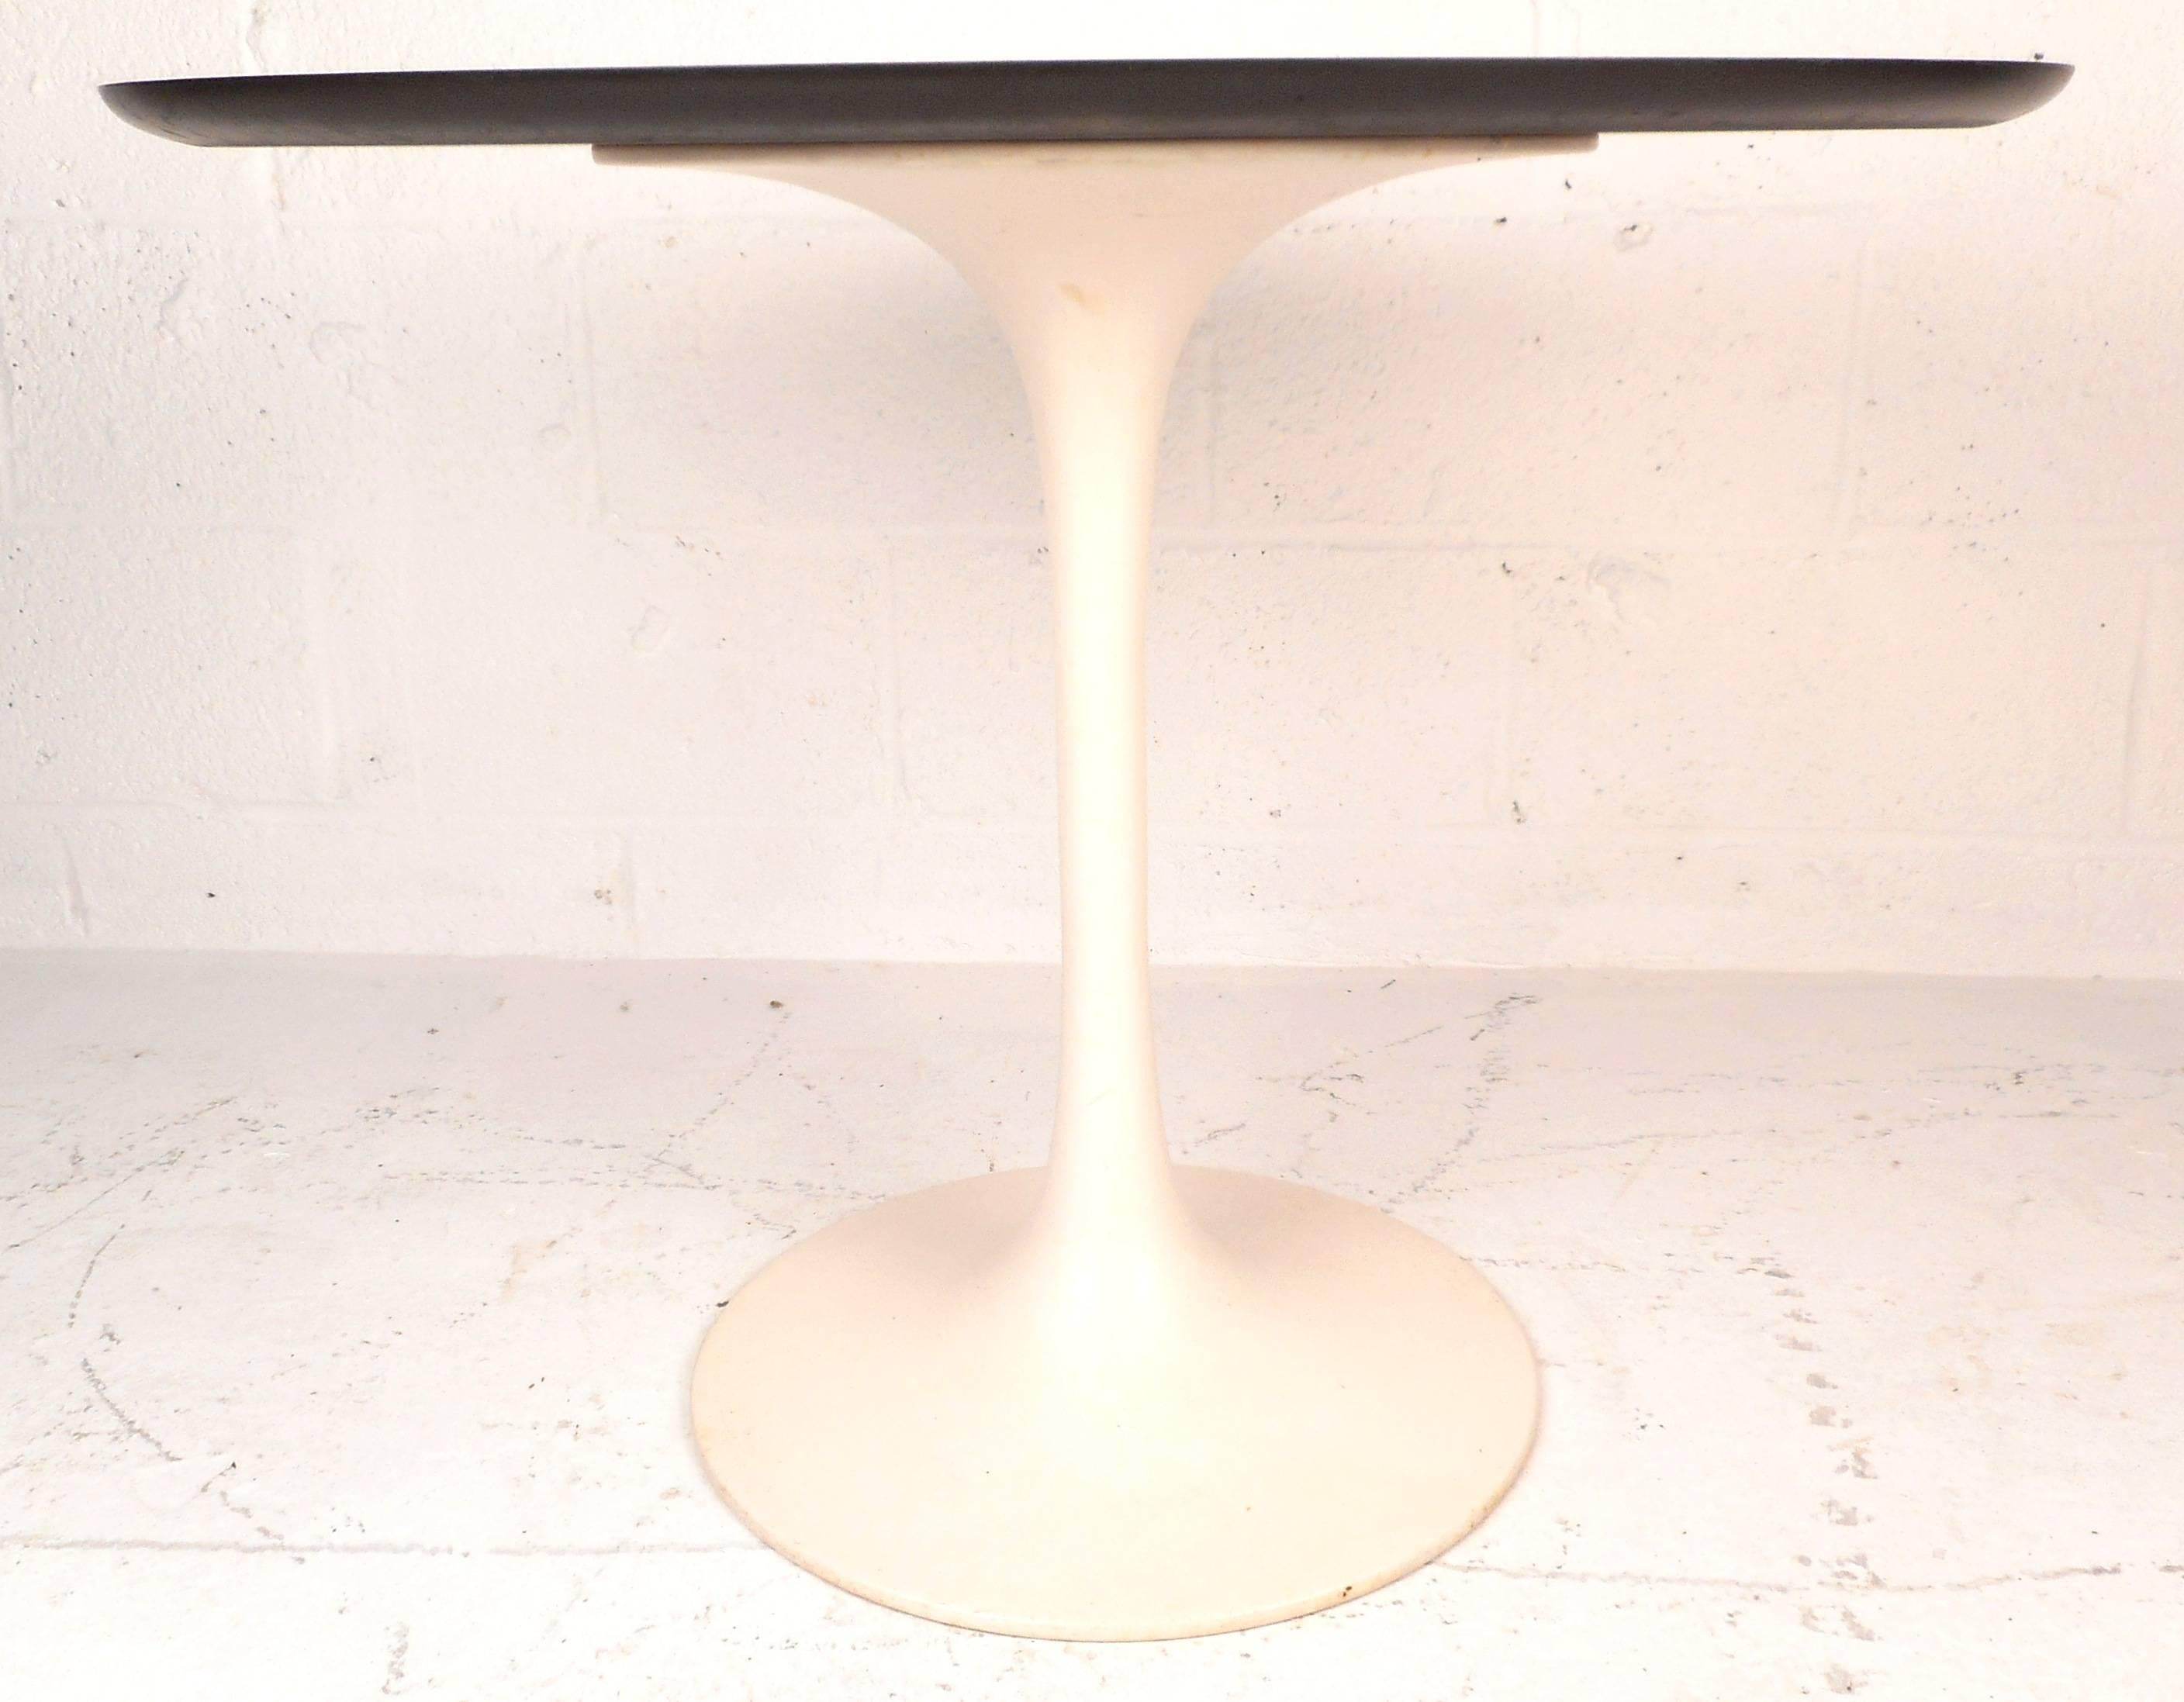 This wonderful mid-century modern side table features a cast iron tulip shaped base. This unique knoll style piece makes the perfect addition to any modern interior. Please confirm item location (NY or NJ).